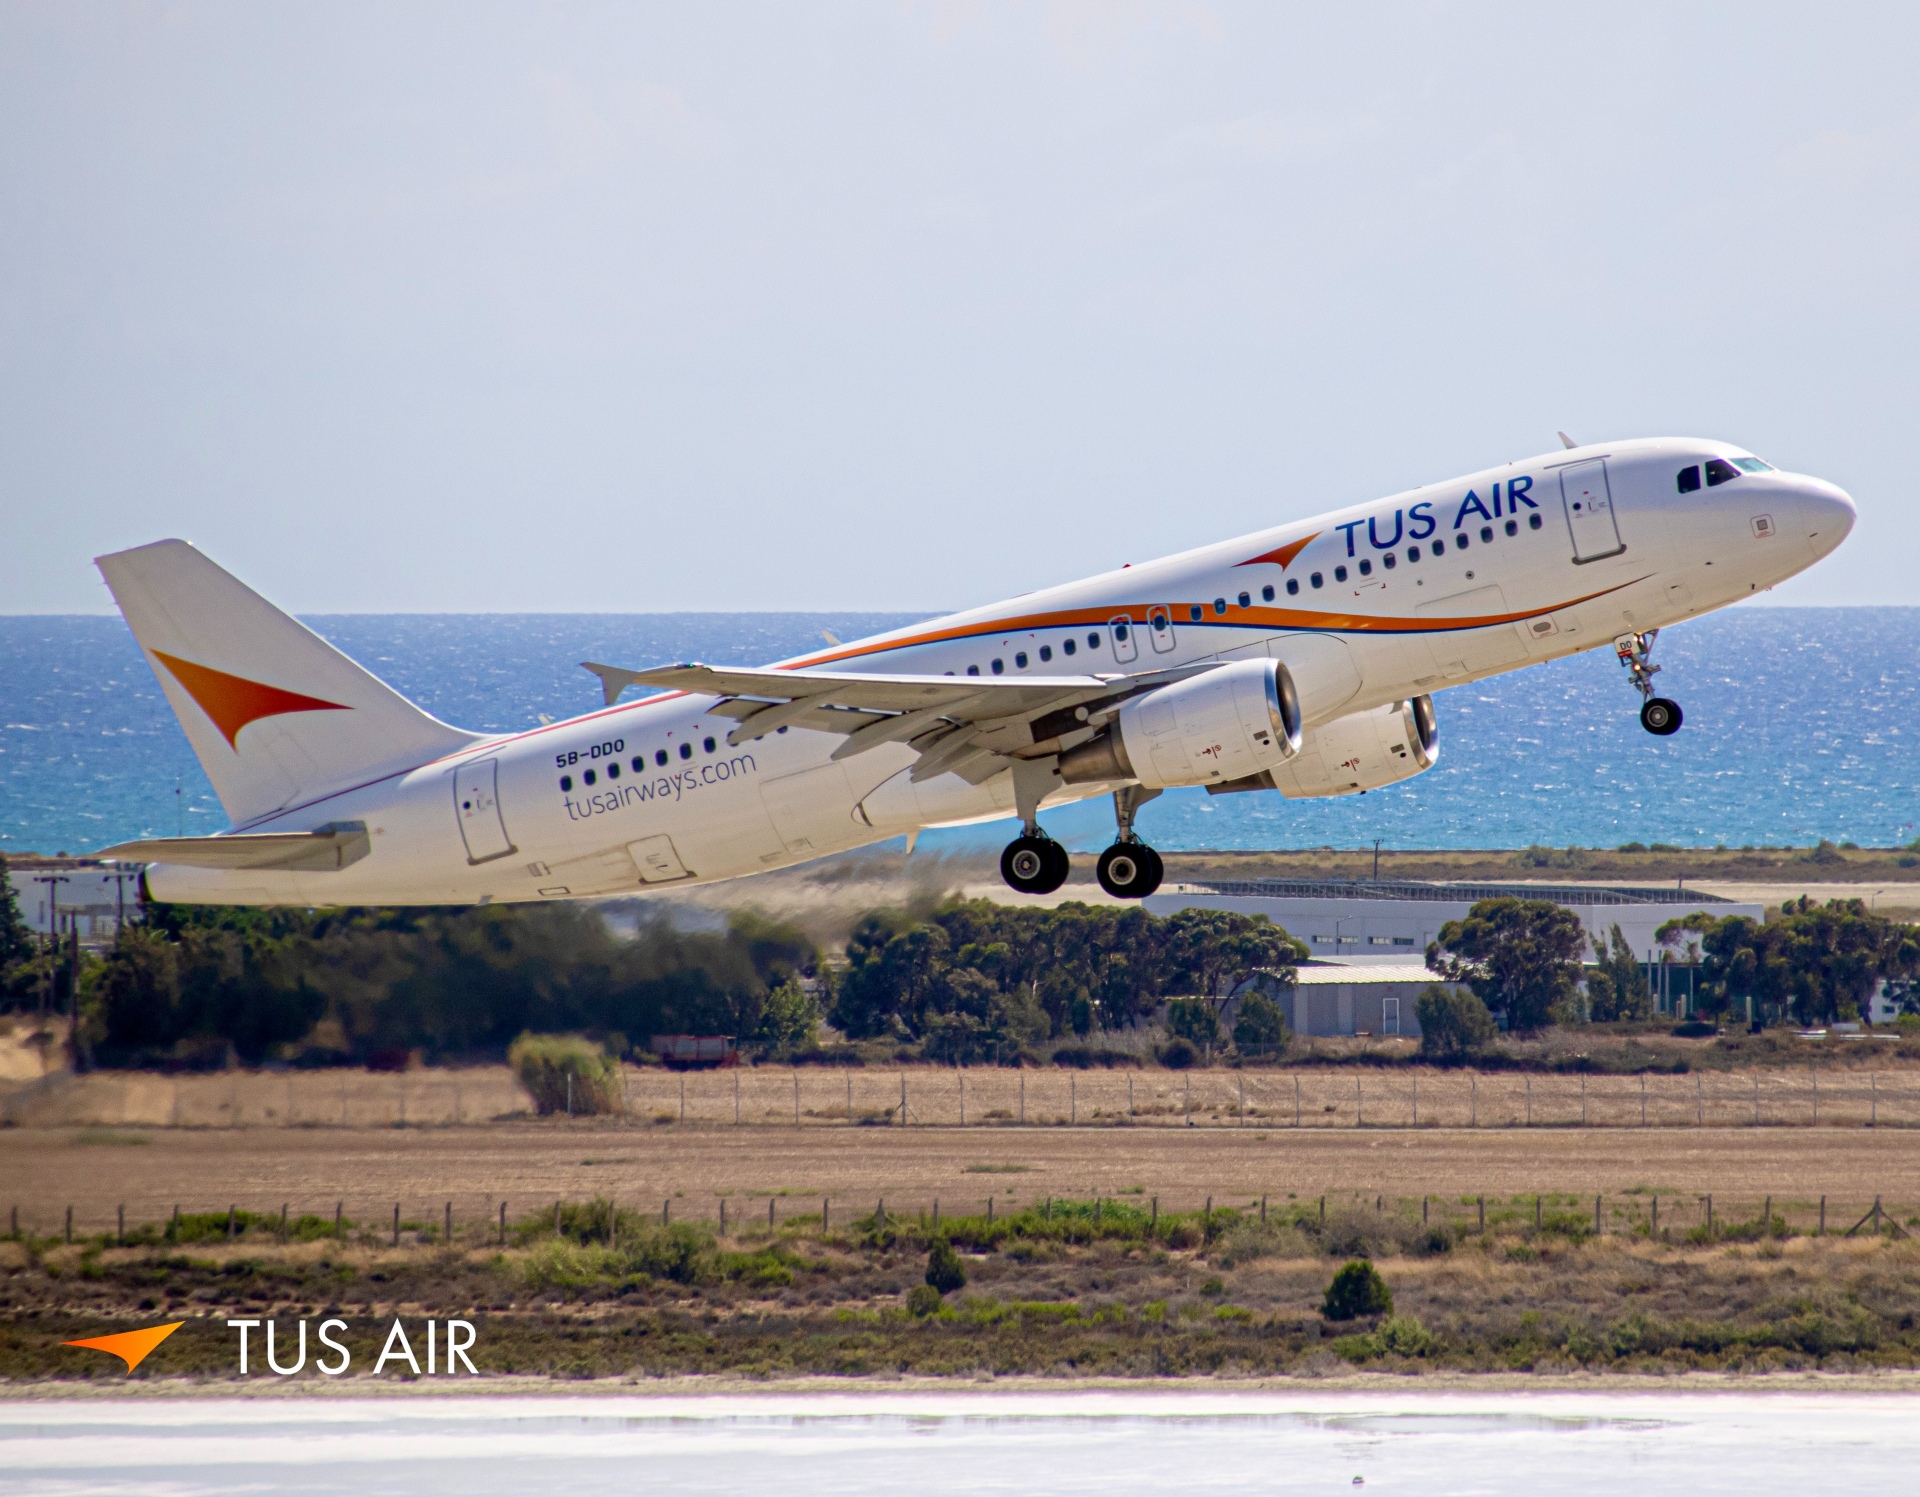 Why  did  Lebanon  bar  Cyprus's  Largest  airline TUS  Airways  from Flying  in  its  Airspace  ?